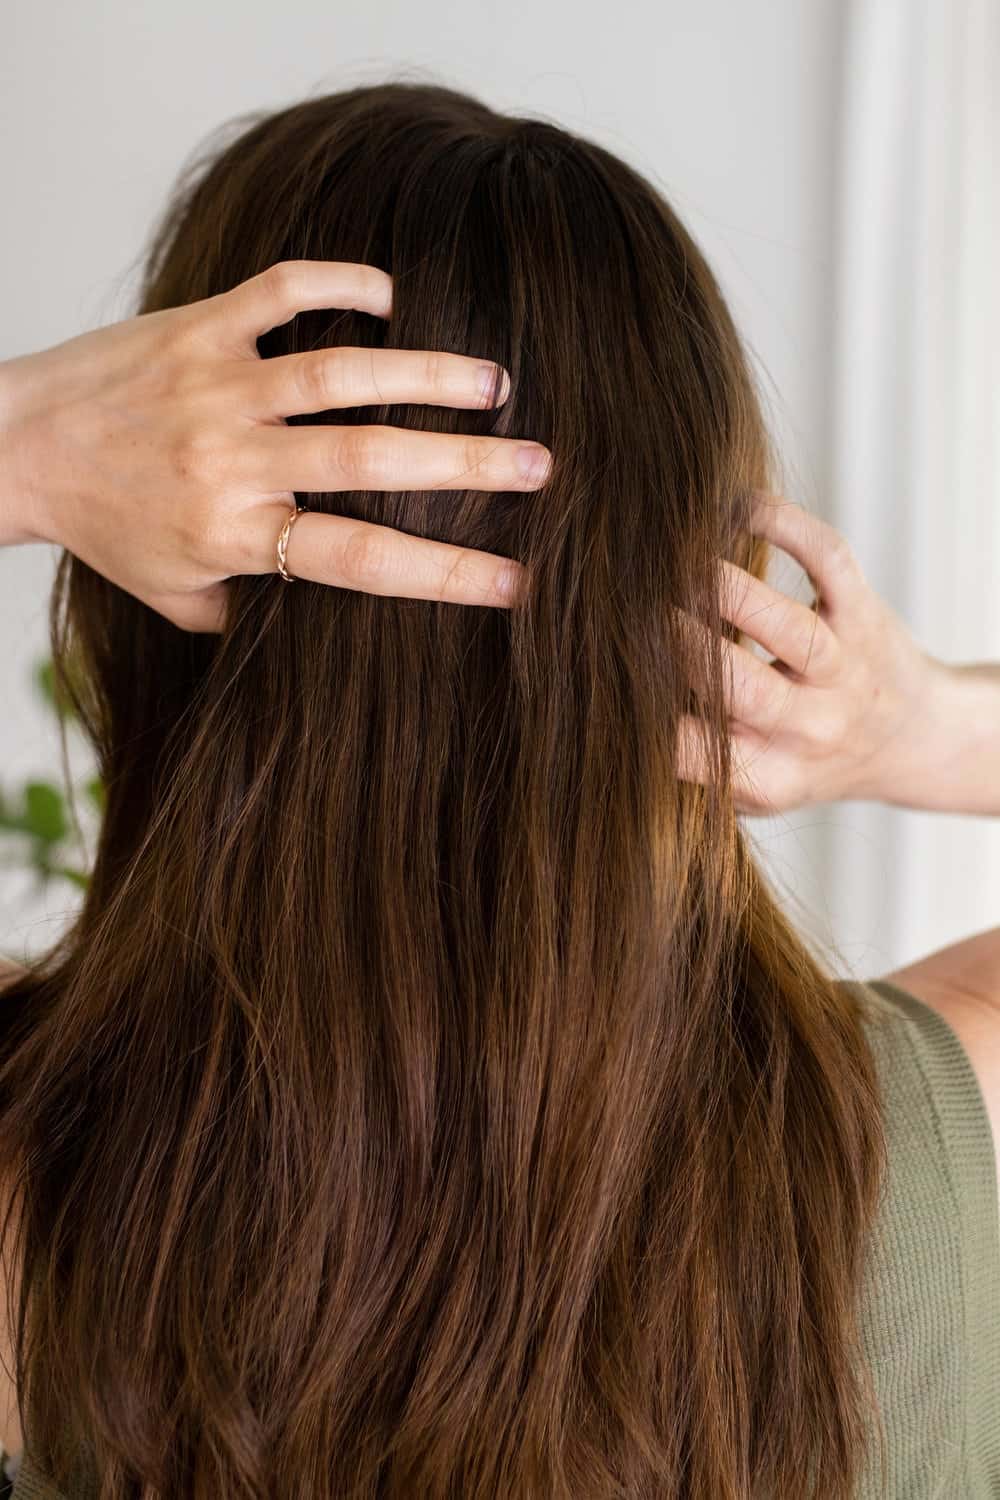 How to do a scalp massage for hair growth + relaxation